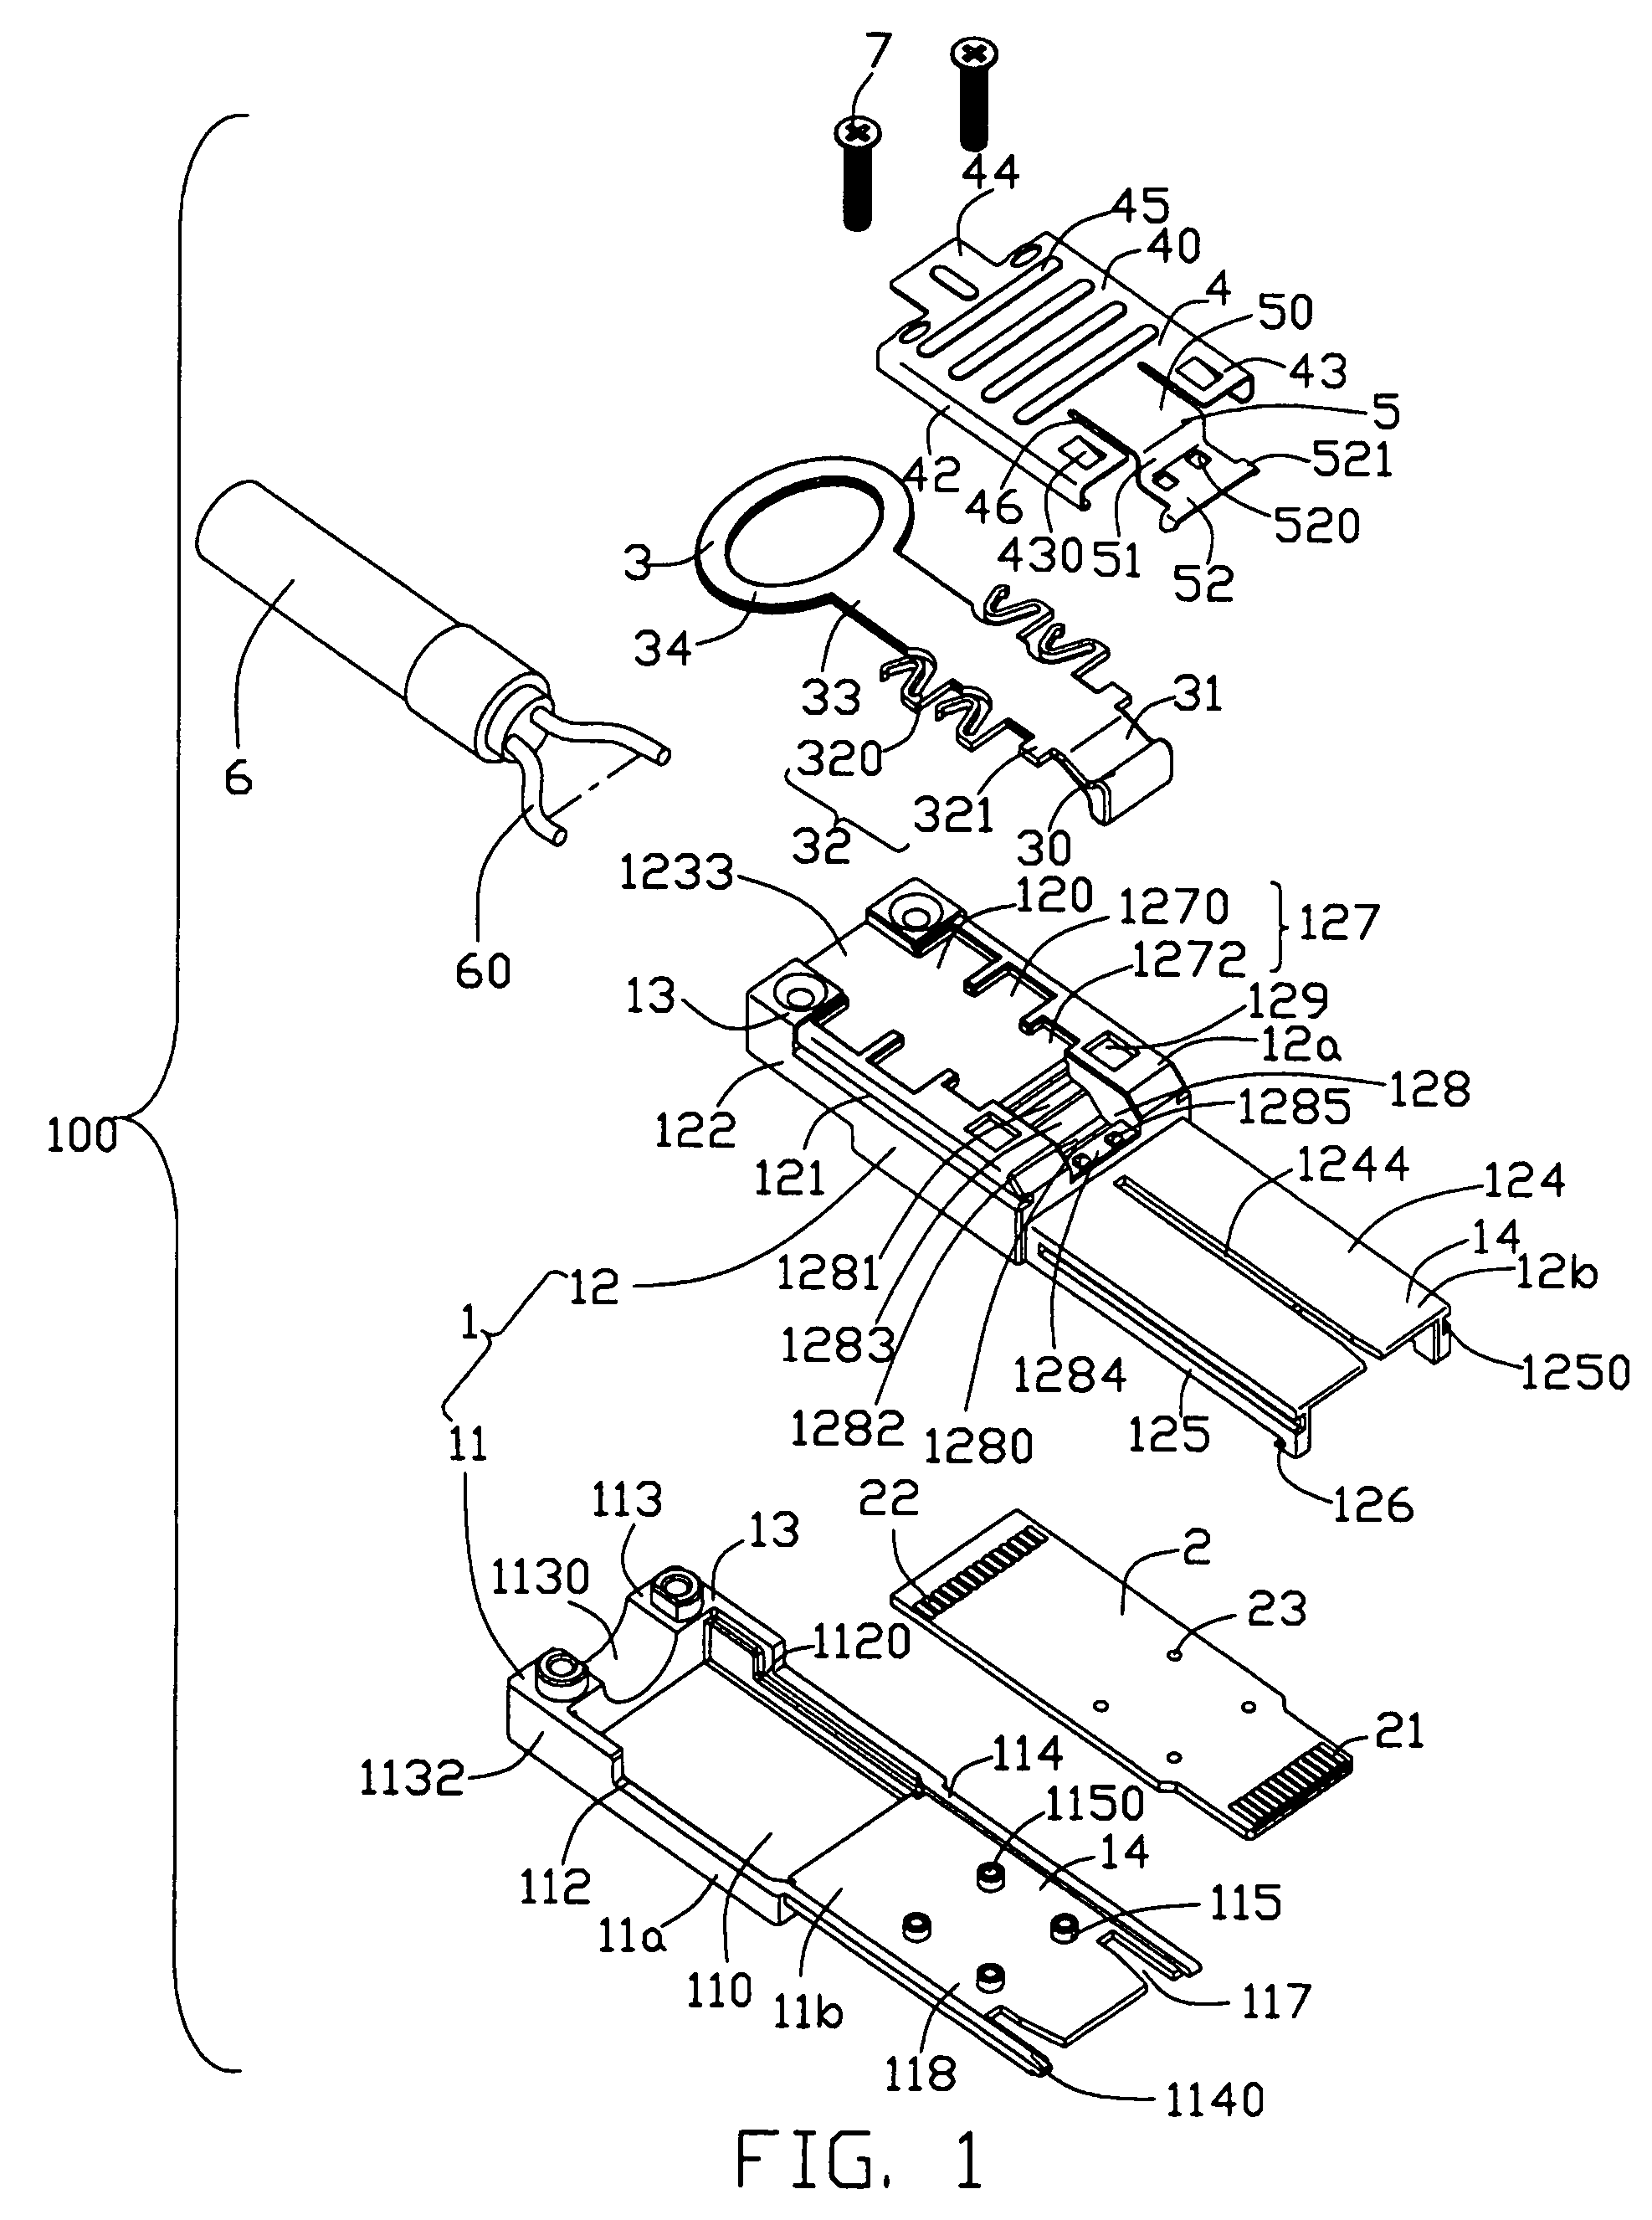 Cable connector assembly with latching mechanism